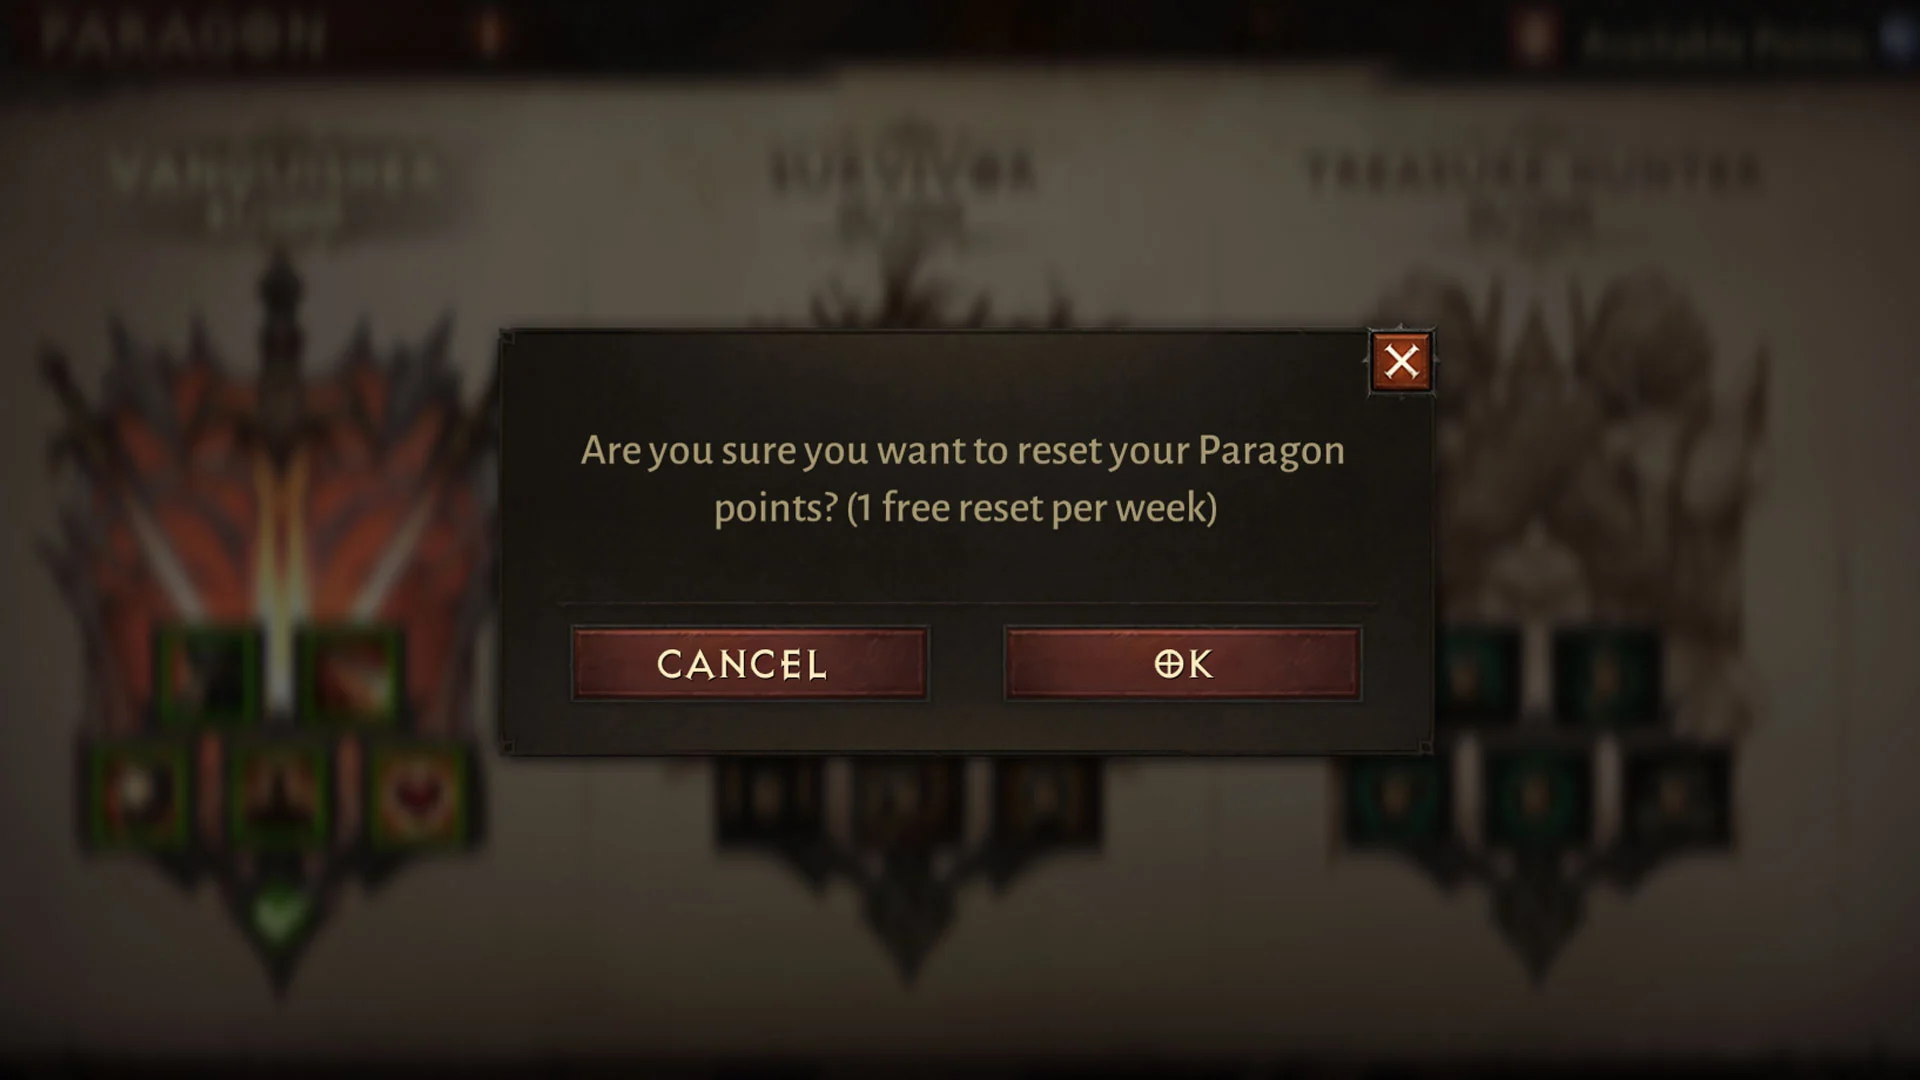 How to Reset Paragon Points in Diablo Immortal